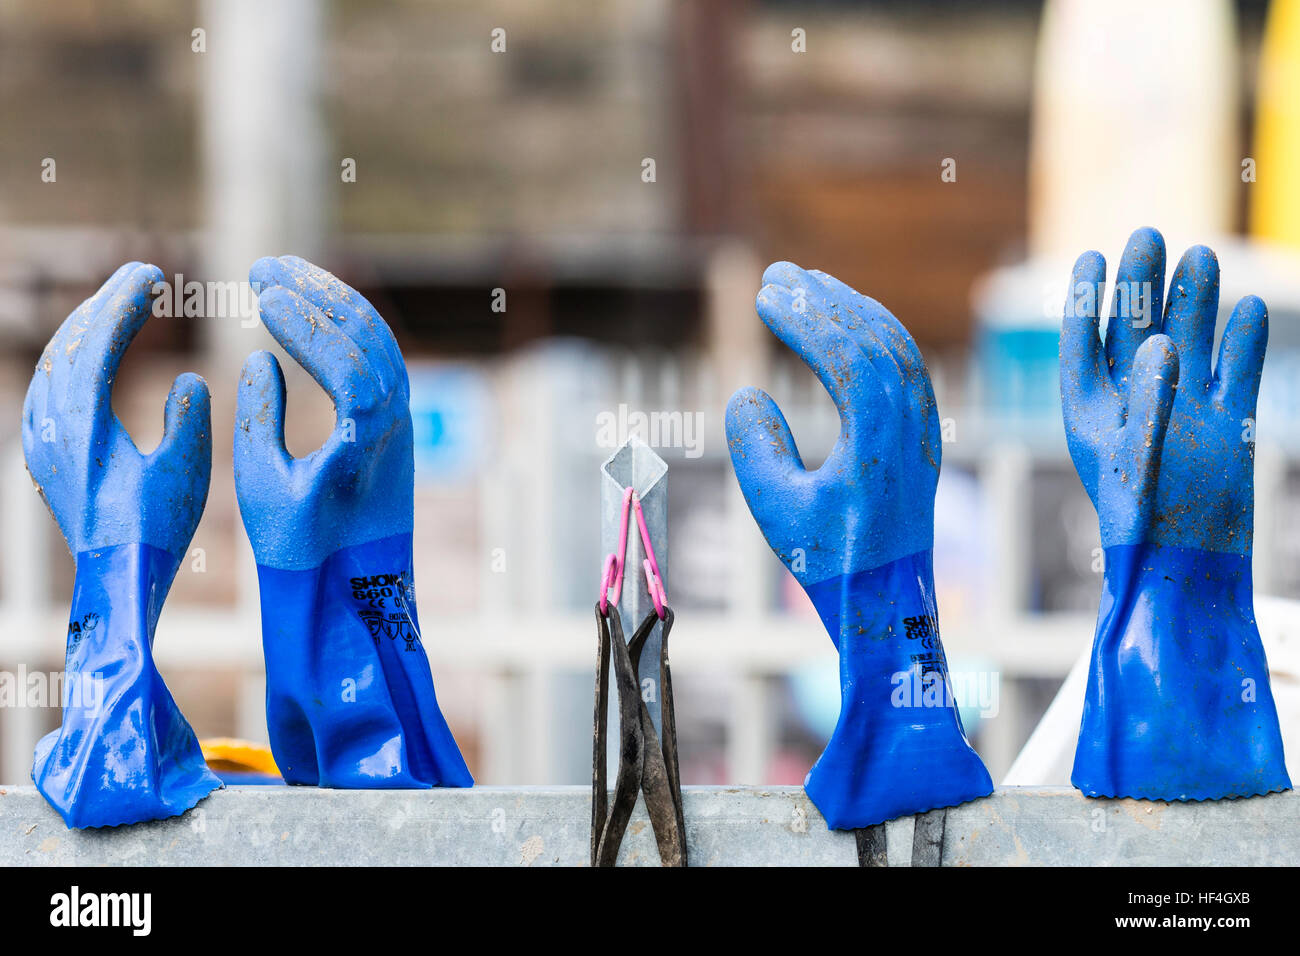 England, Whitstable. Two pairs of blue rubber gloves left to dry overnight on prongs of metal fence Stock Photo